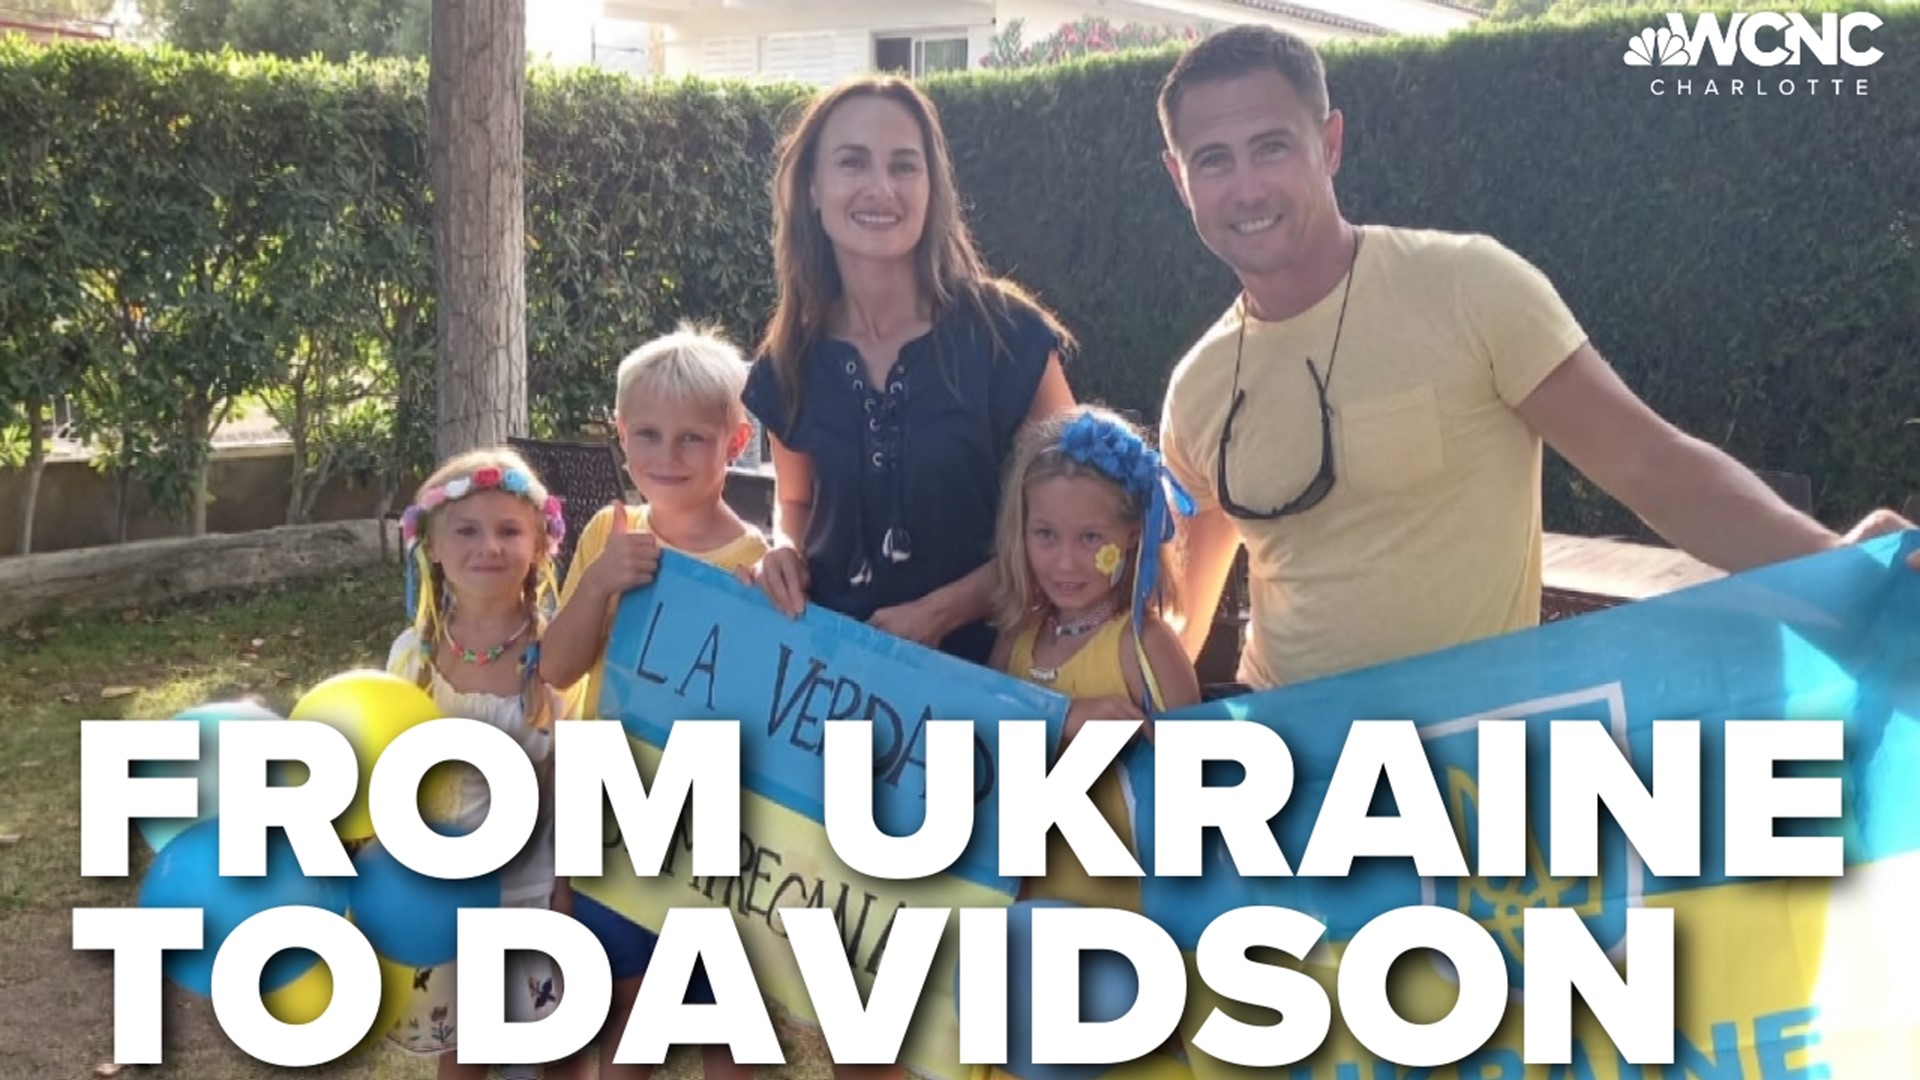 Olha Davydenko, her husband, and three kids left Ukraine in March of last year, after the war. They spent some time in Spain but now call North Carolina home.